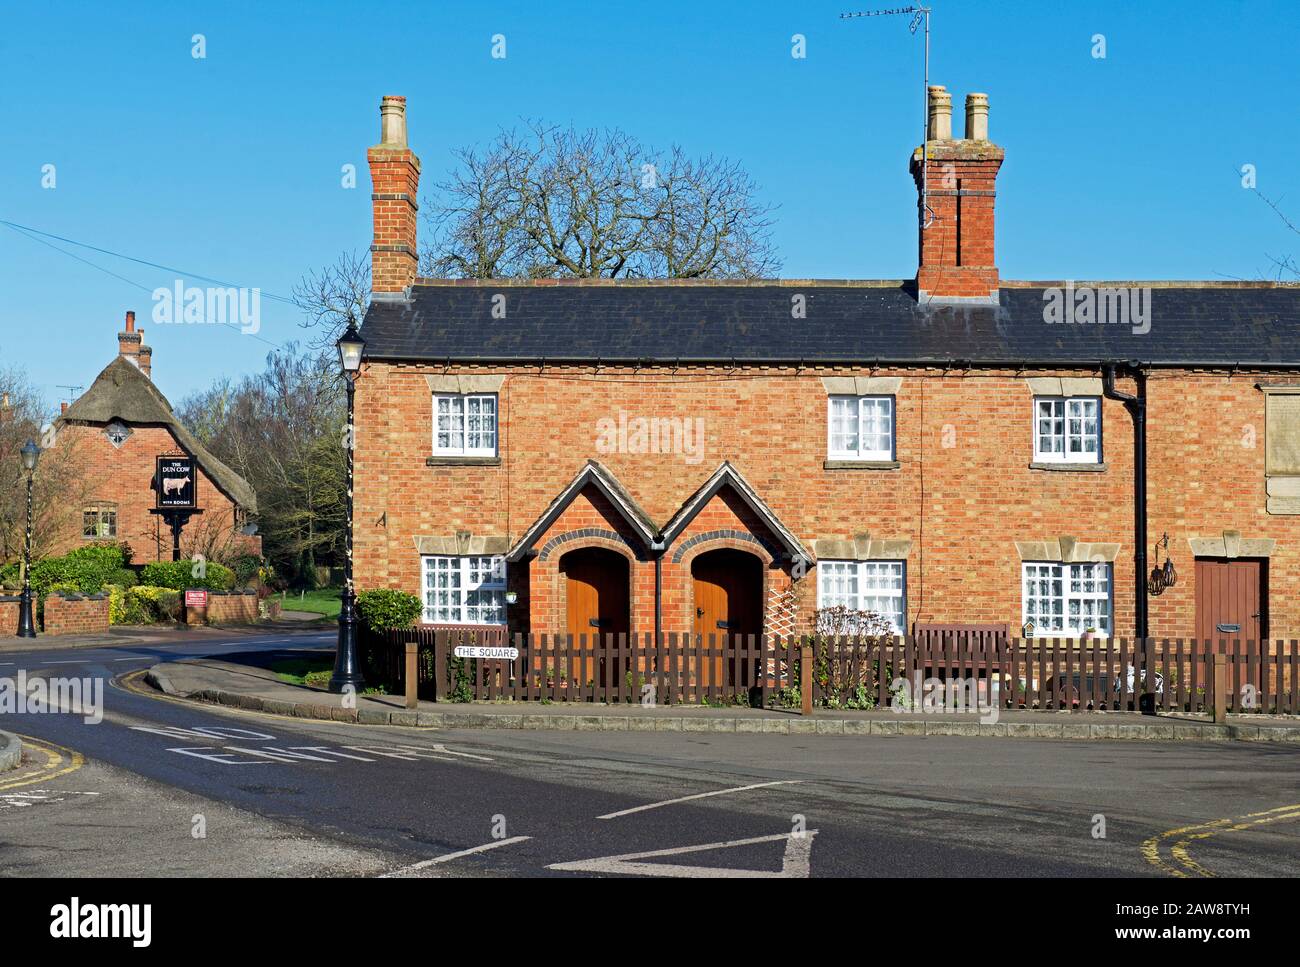 The Newcombe and Spier Almshouses in Dunchurch, Warwickshire, England UK Stock Photo